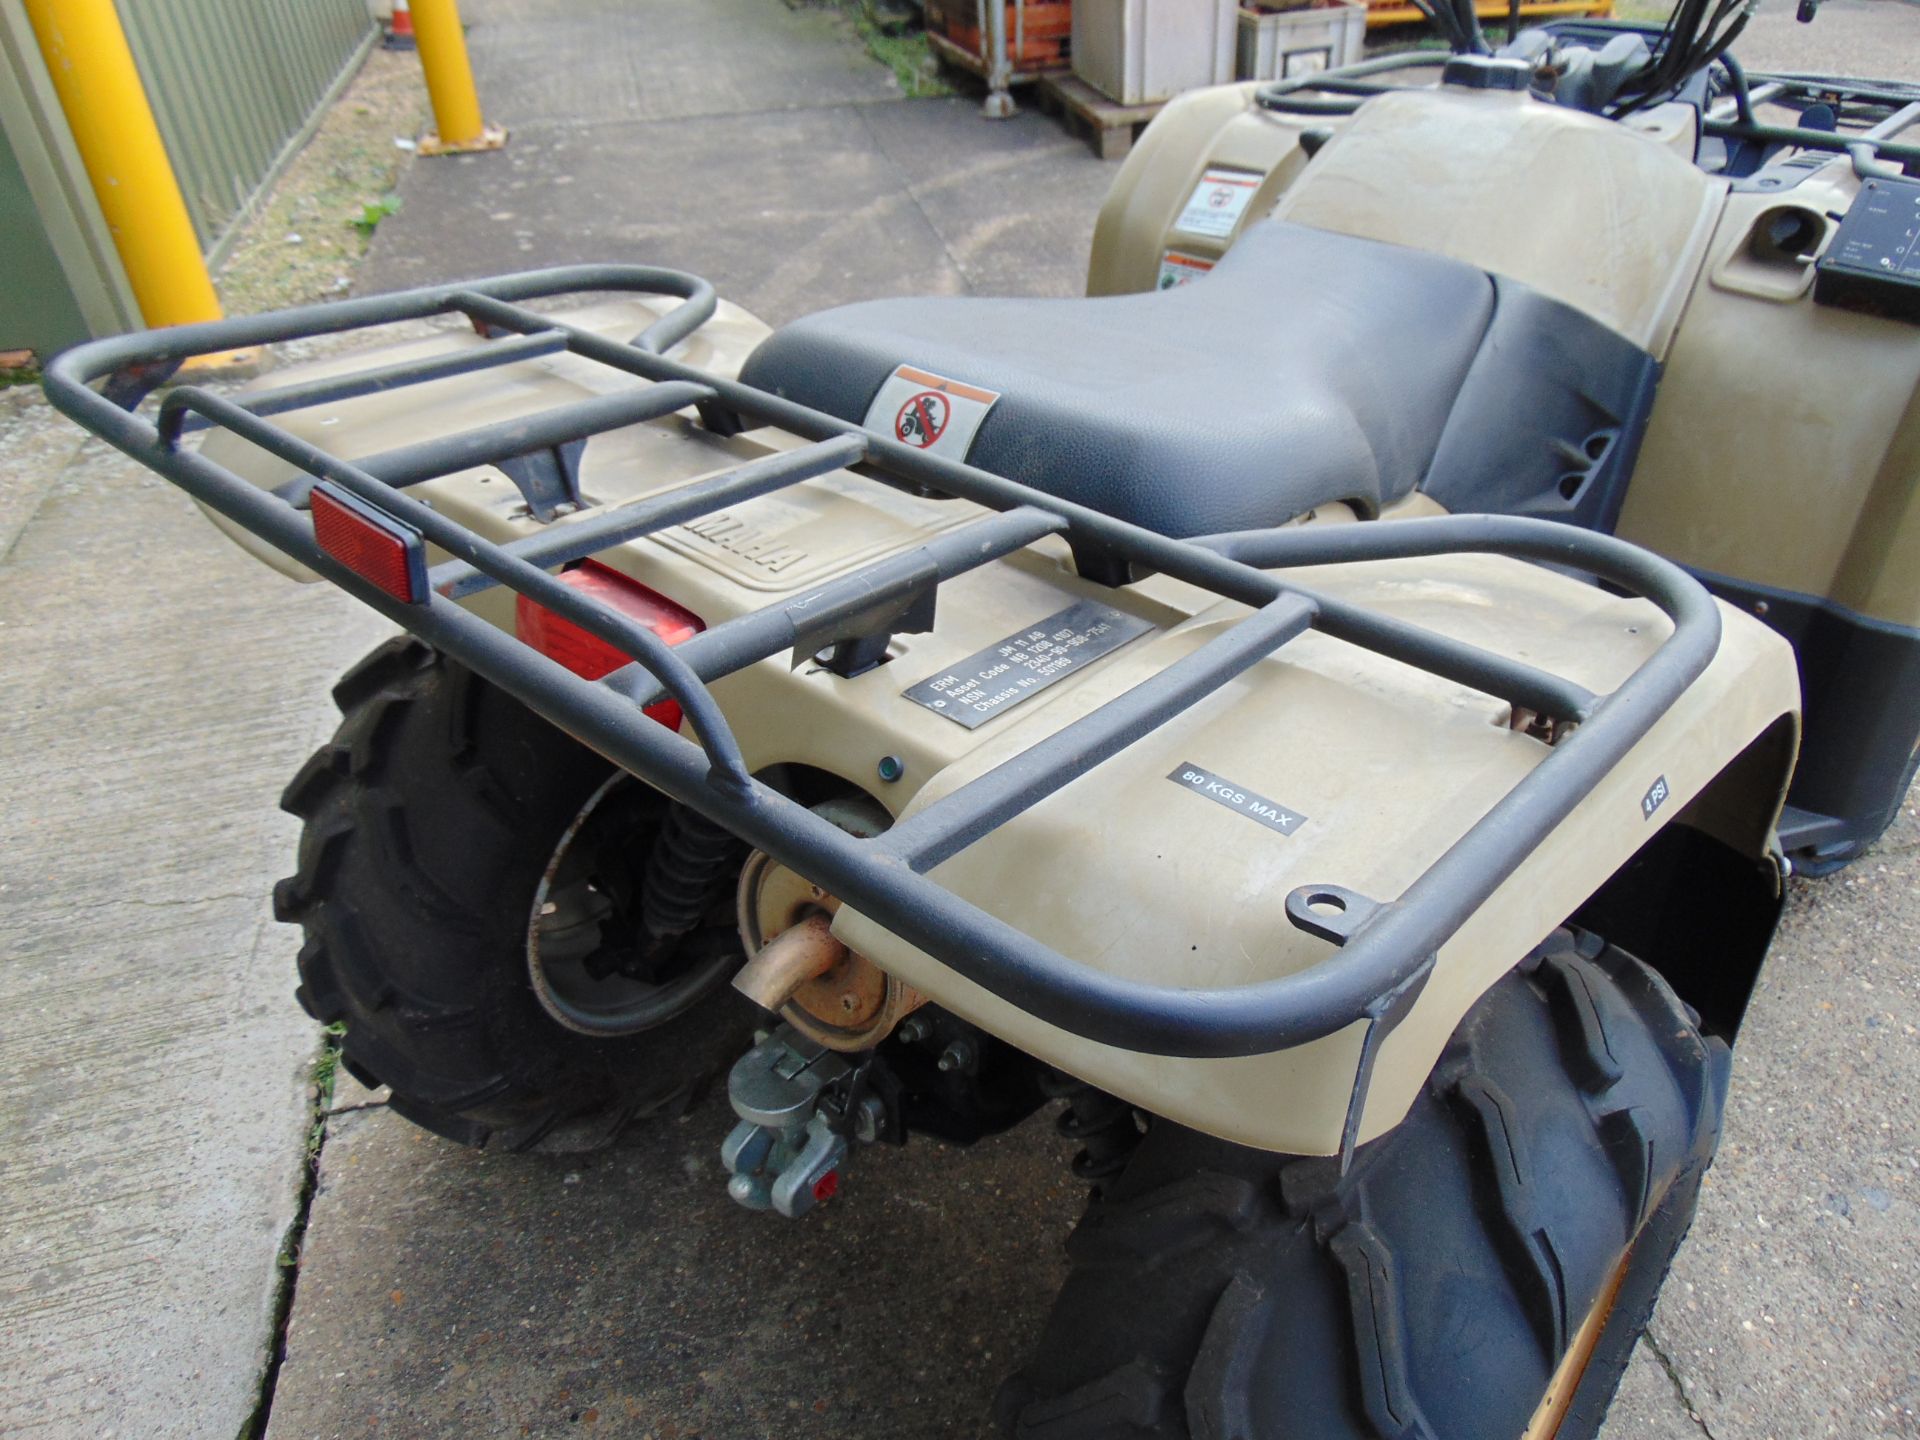 Military Specification Yamaha Grizzly 450 4 x 4 ATV Quad Bike Complete with Winch ONLY 591 HOURS! - Image 9 of 16